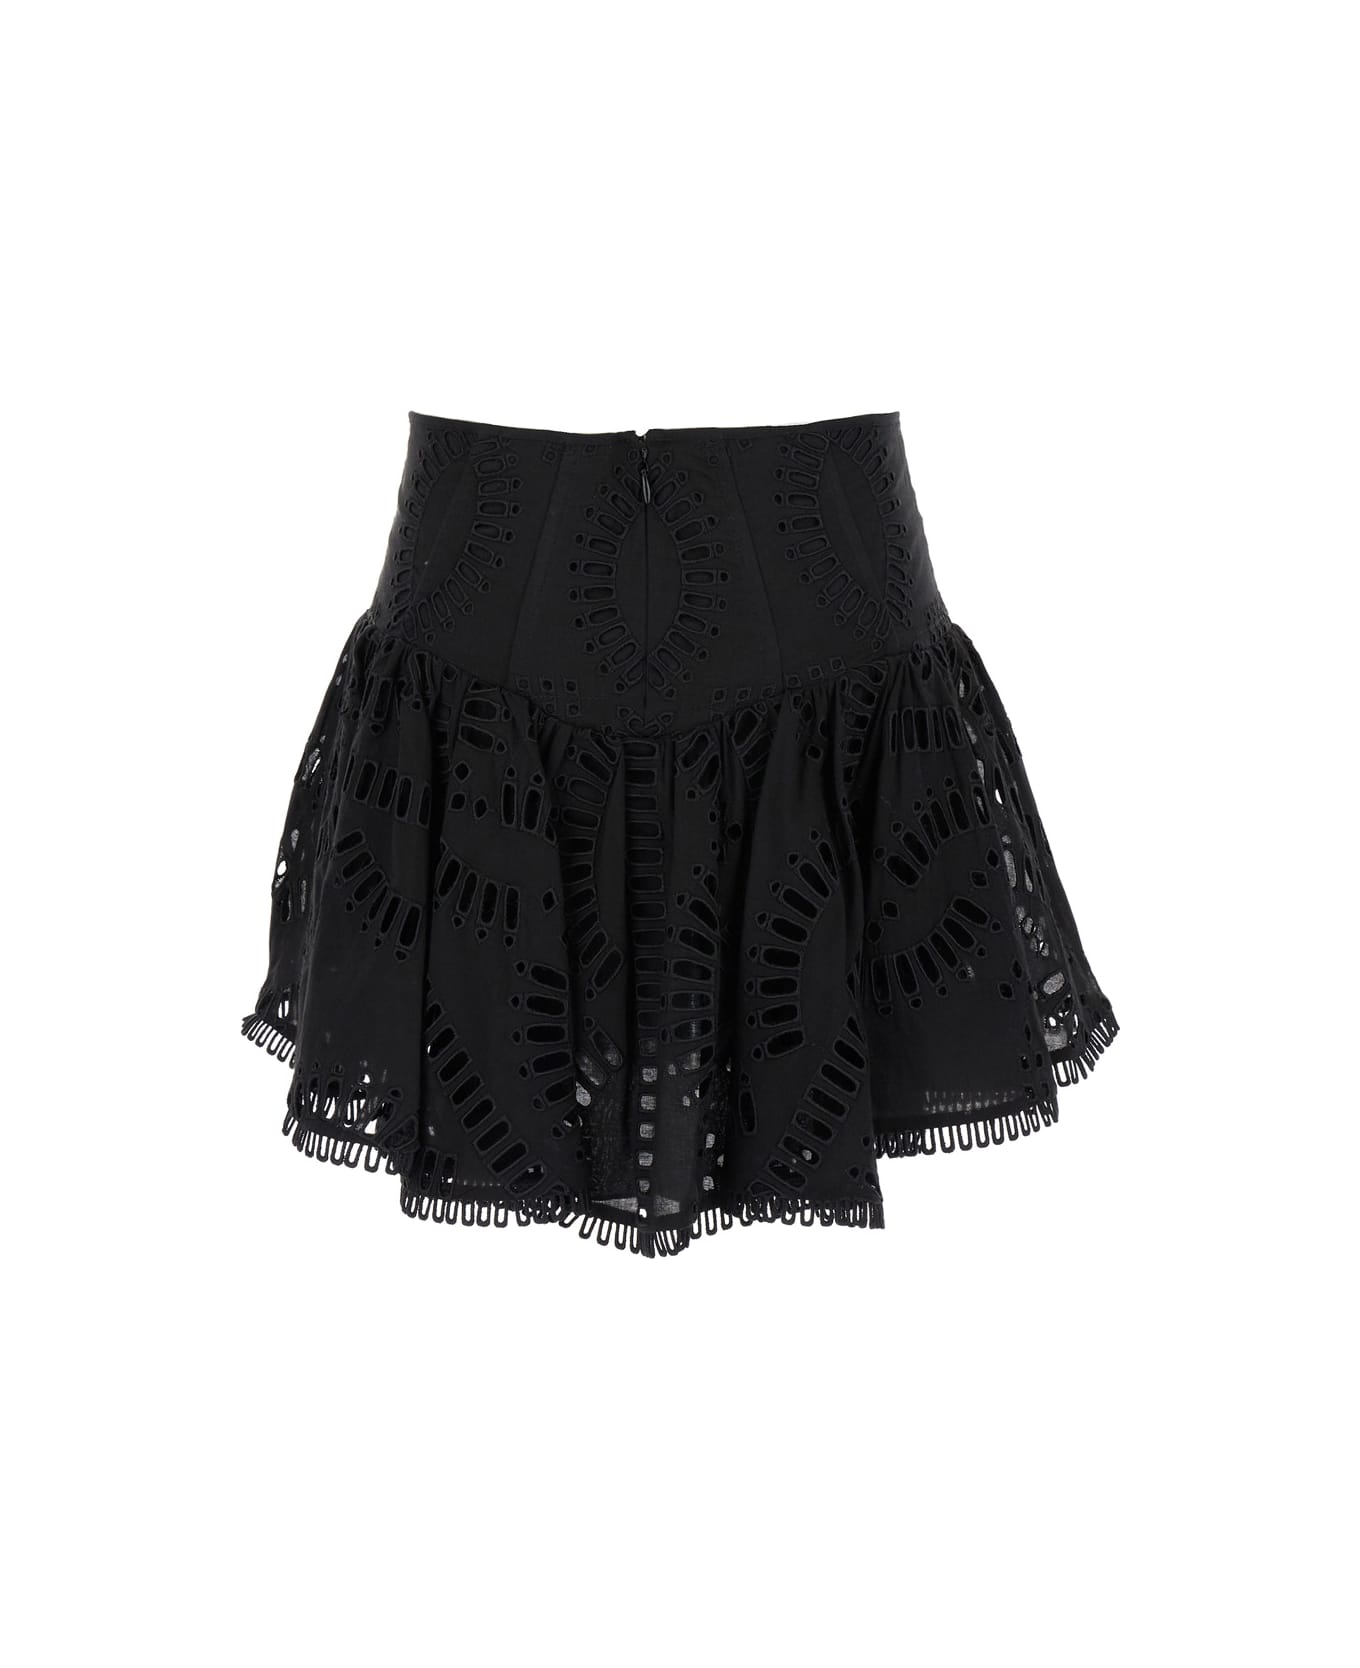 Charo Ruiz Black High Waisted 'favik' Miniskirt With Embroidery In Cotton Blend Woman - Black